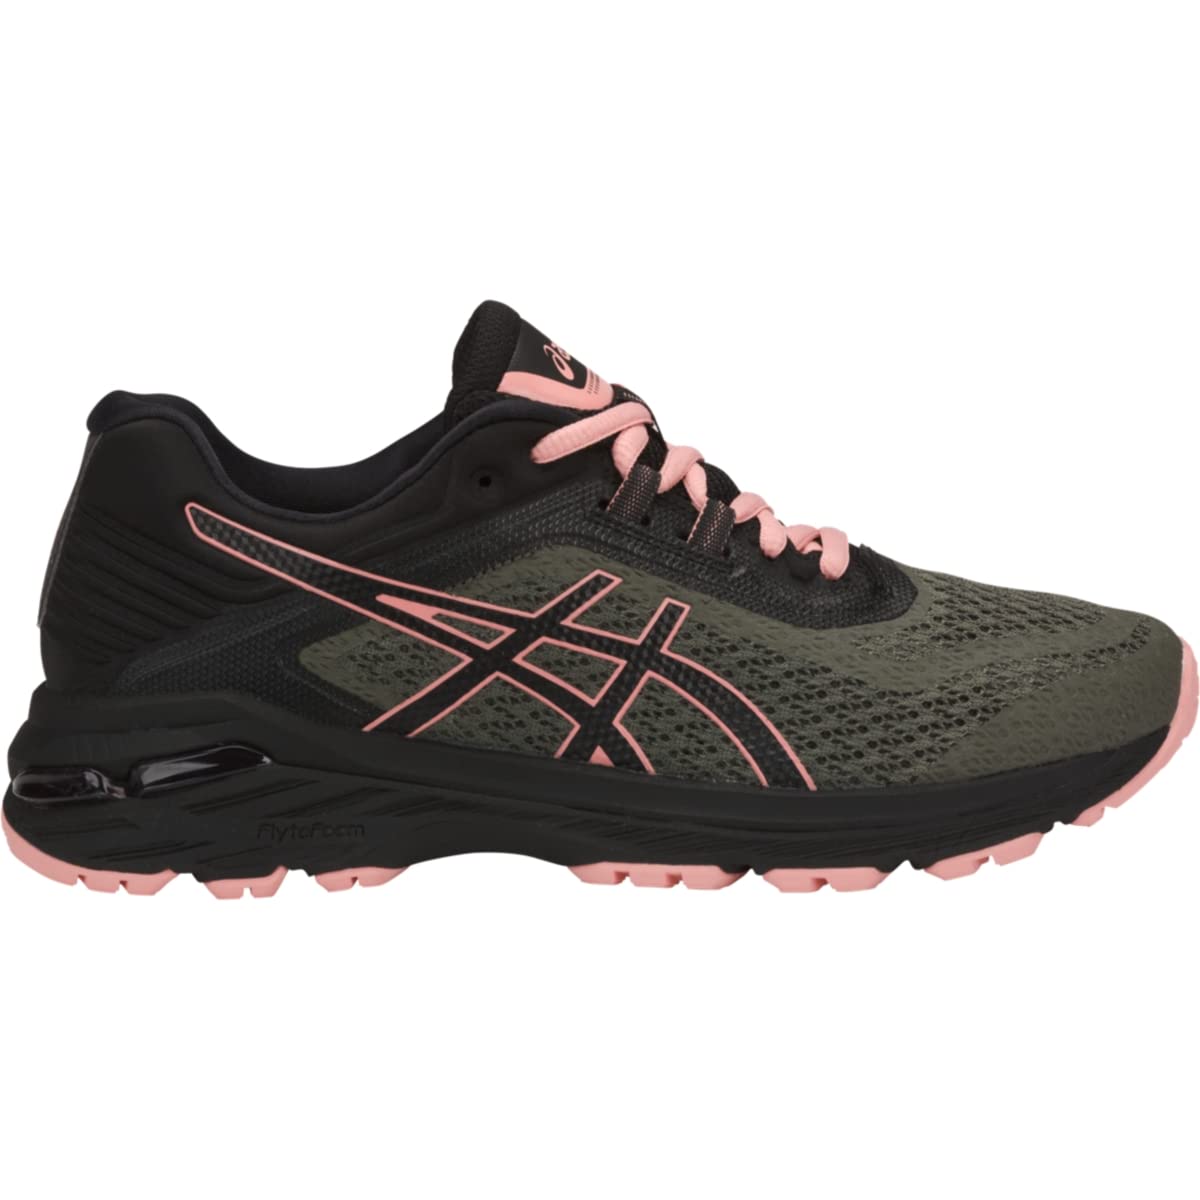 ASICS Women's GT-2000 6 Trail Running Shoes, 6.5, Four Leaf Clover/Black/Coral C